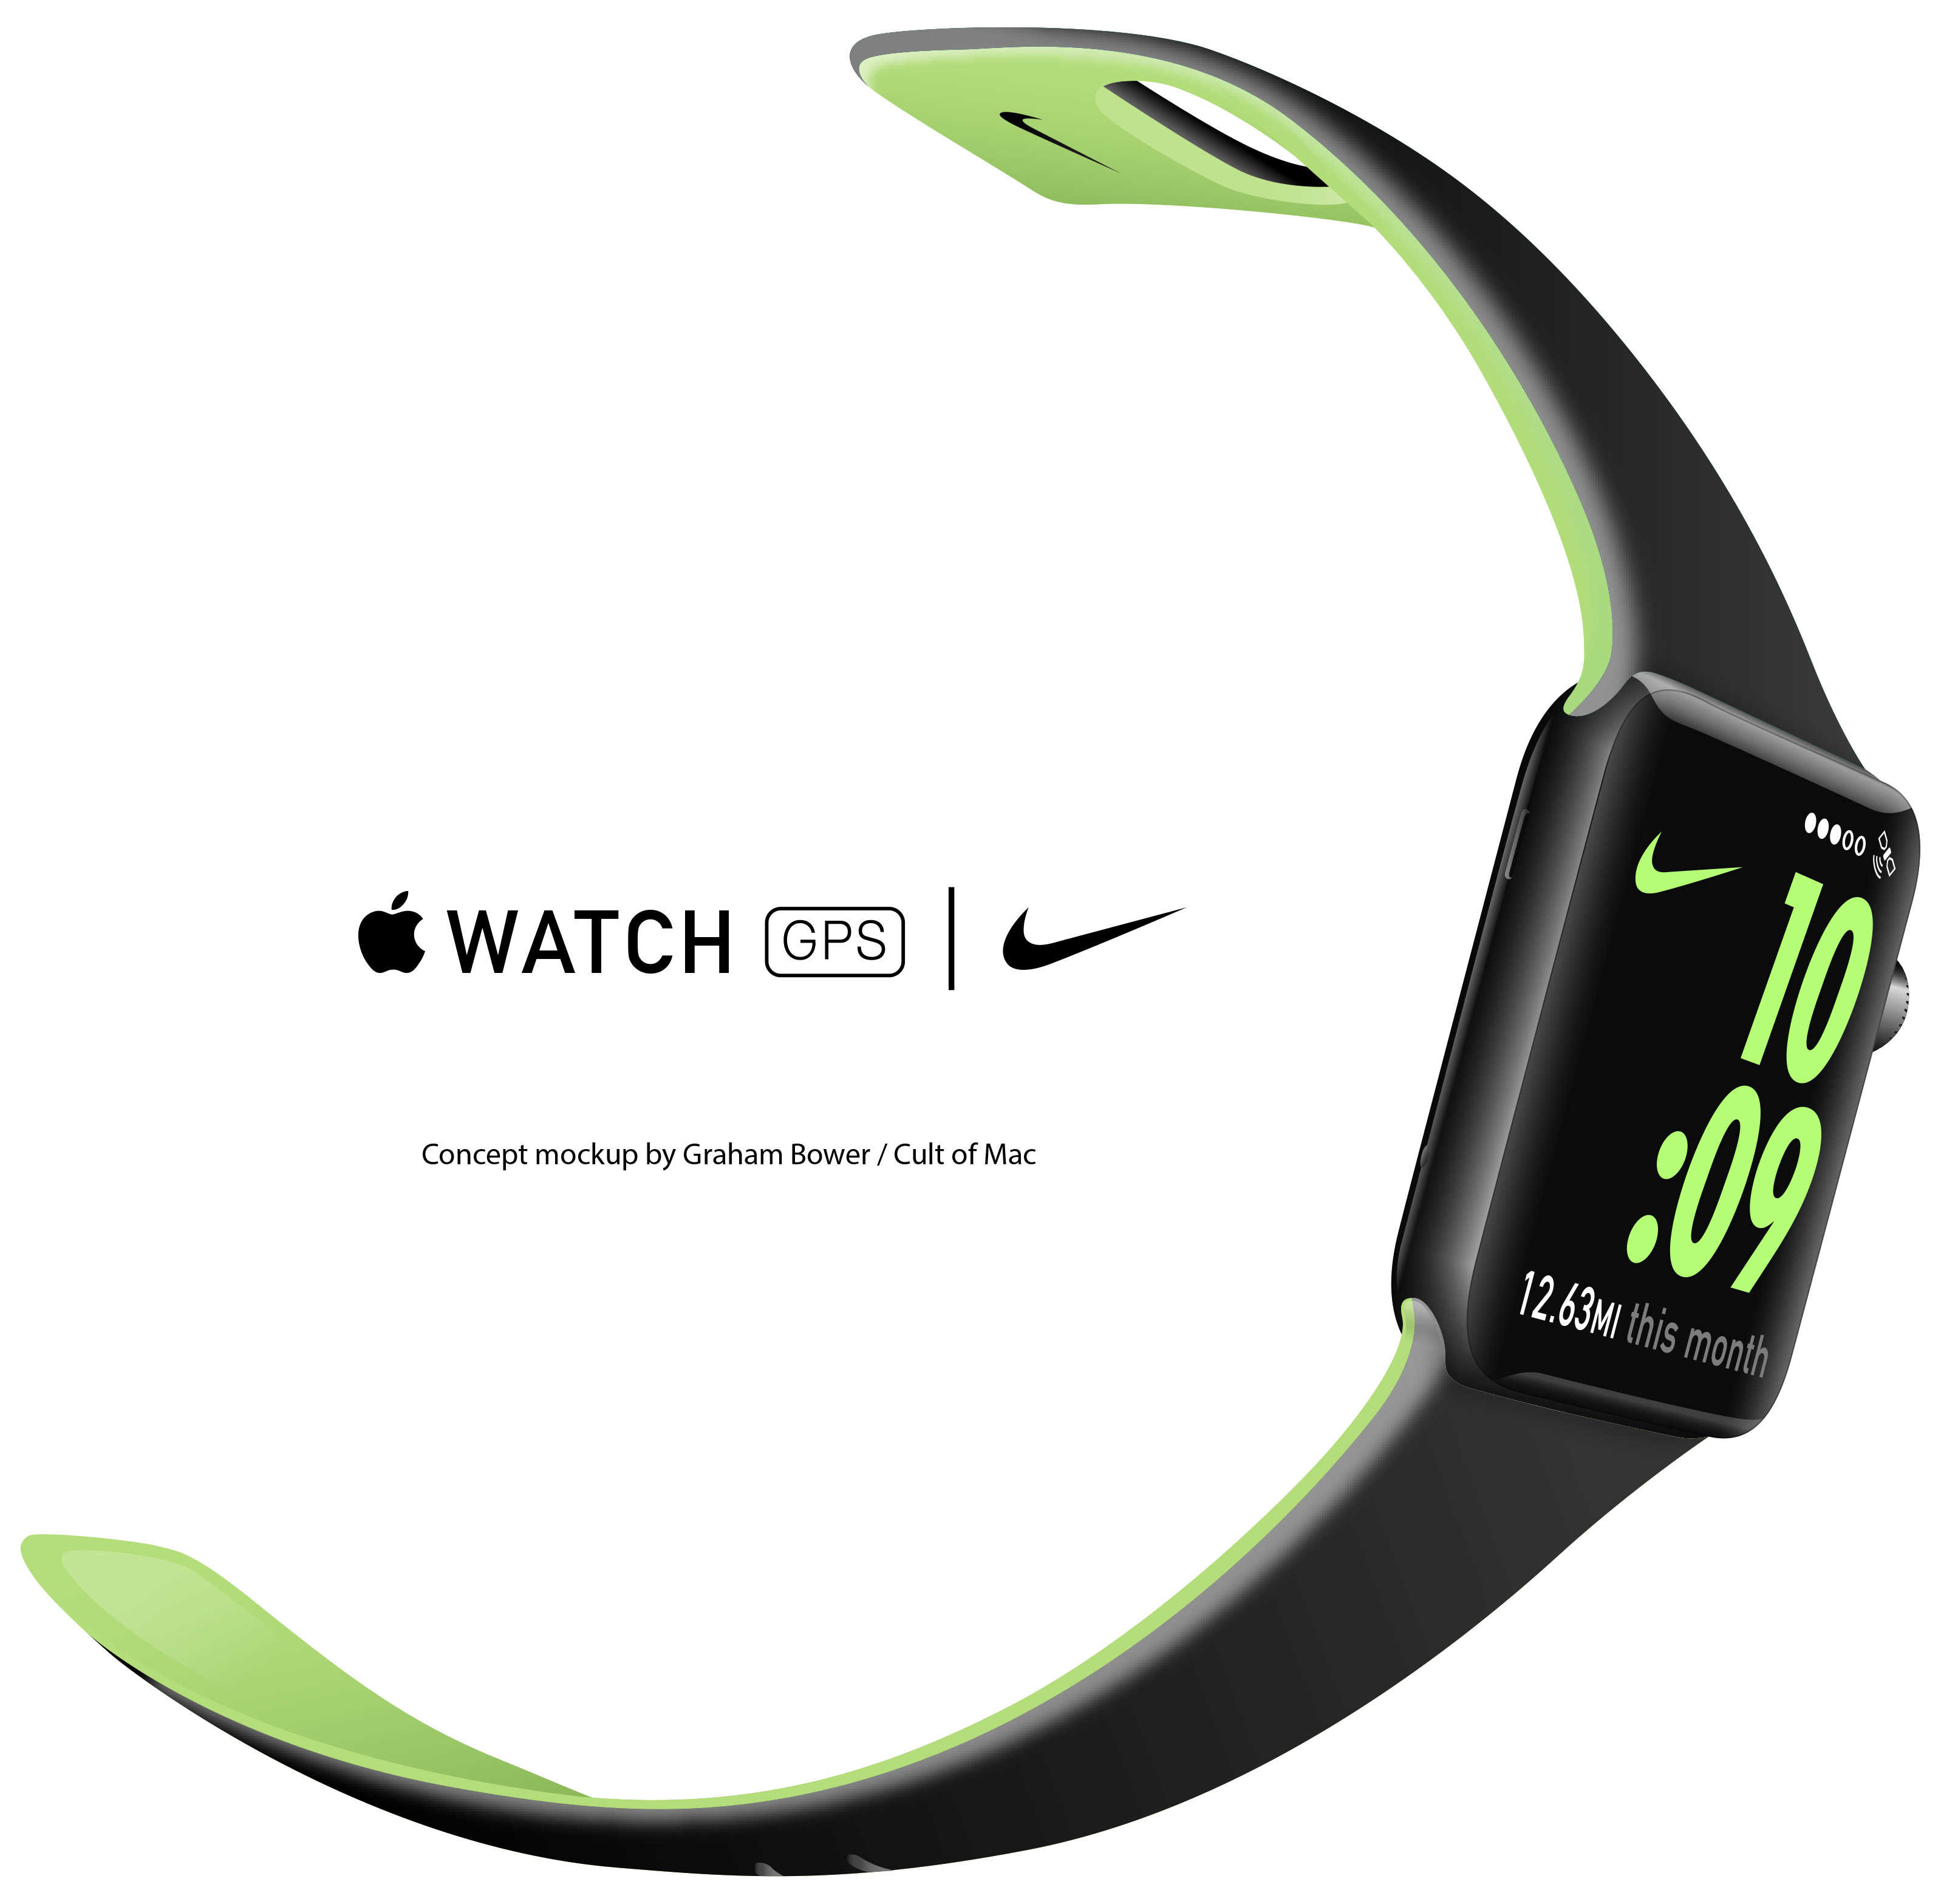 Concept mockup: will Apple Watch 2 focus on runners needs?